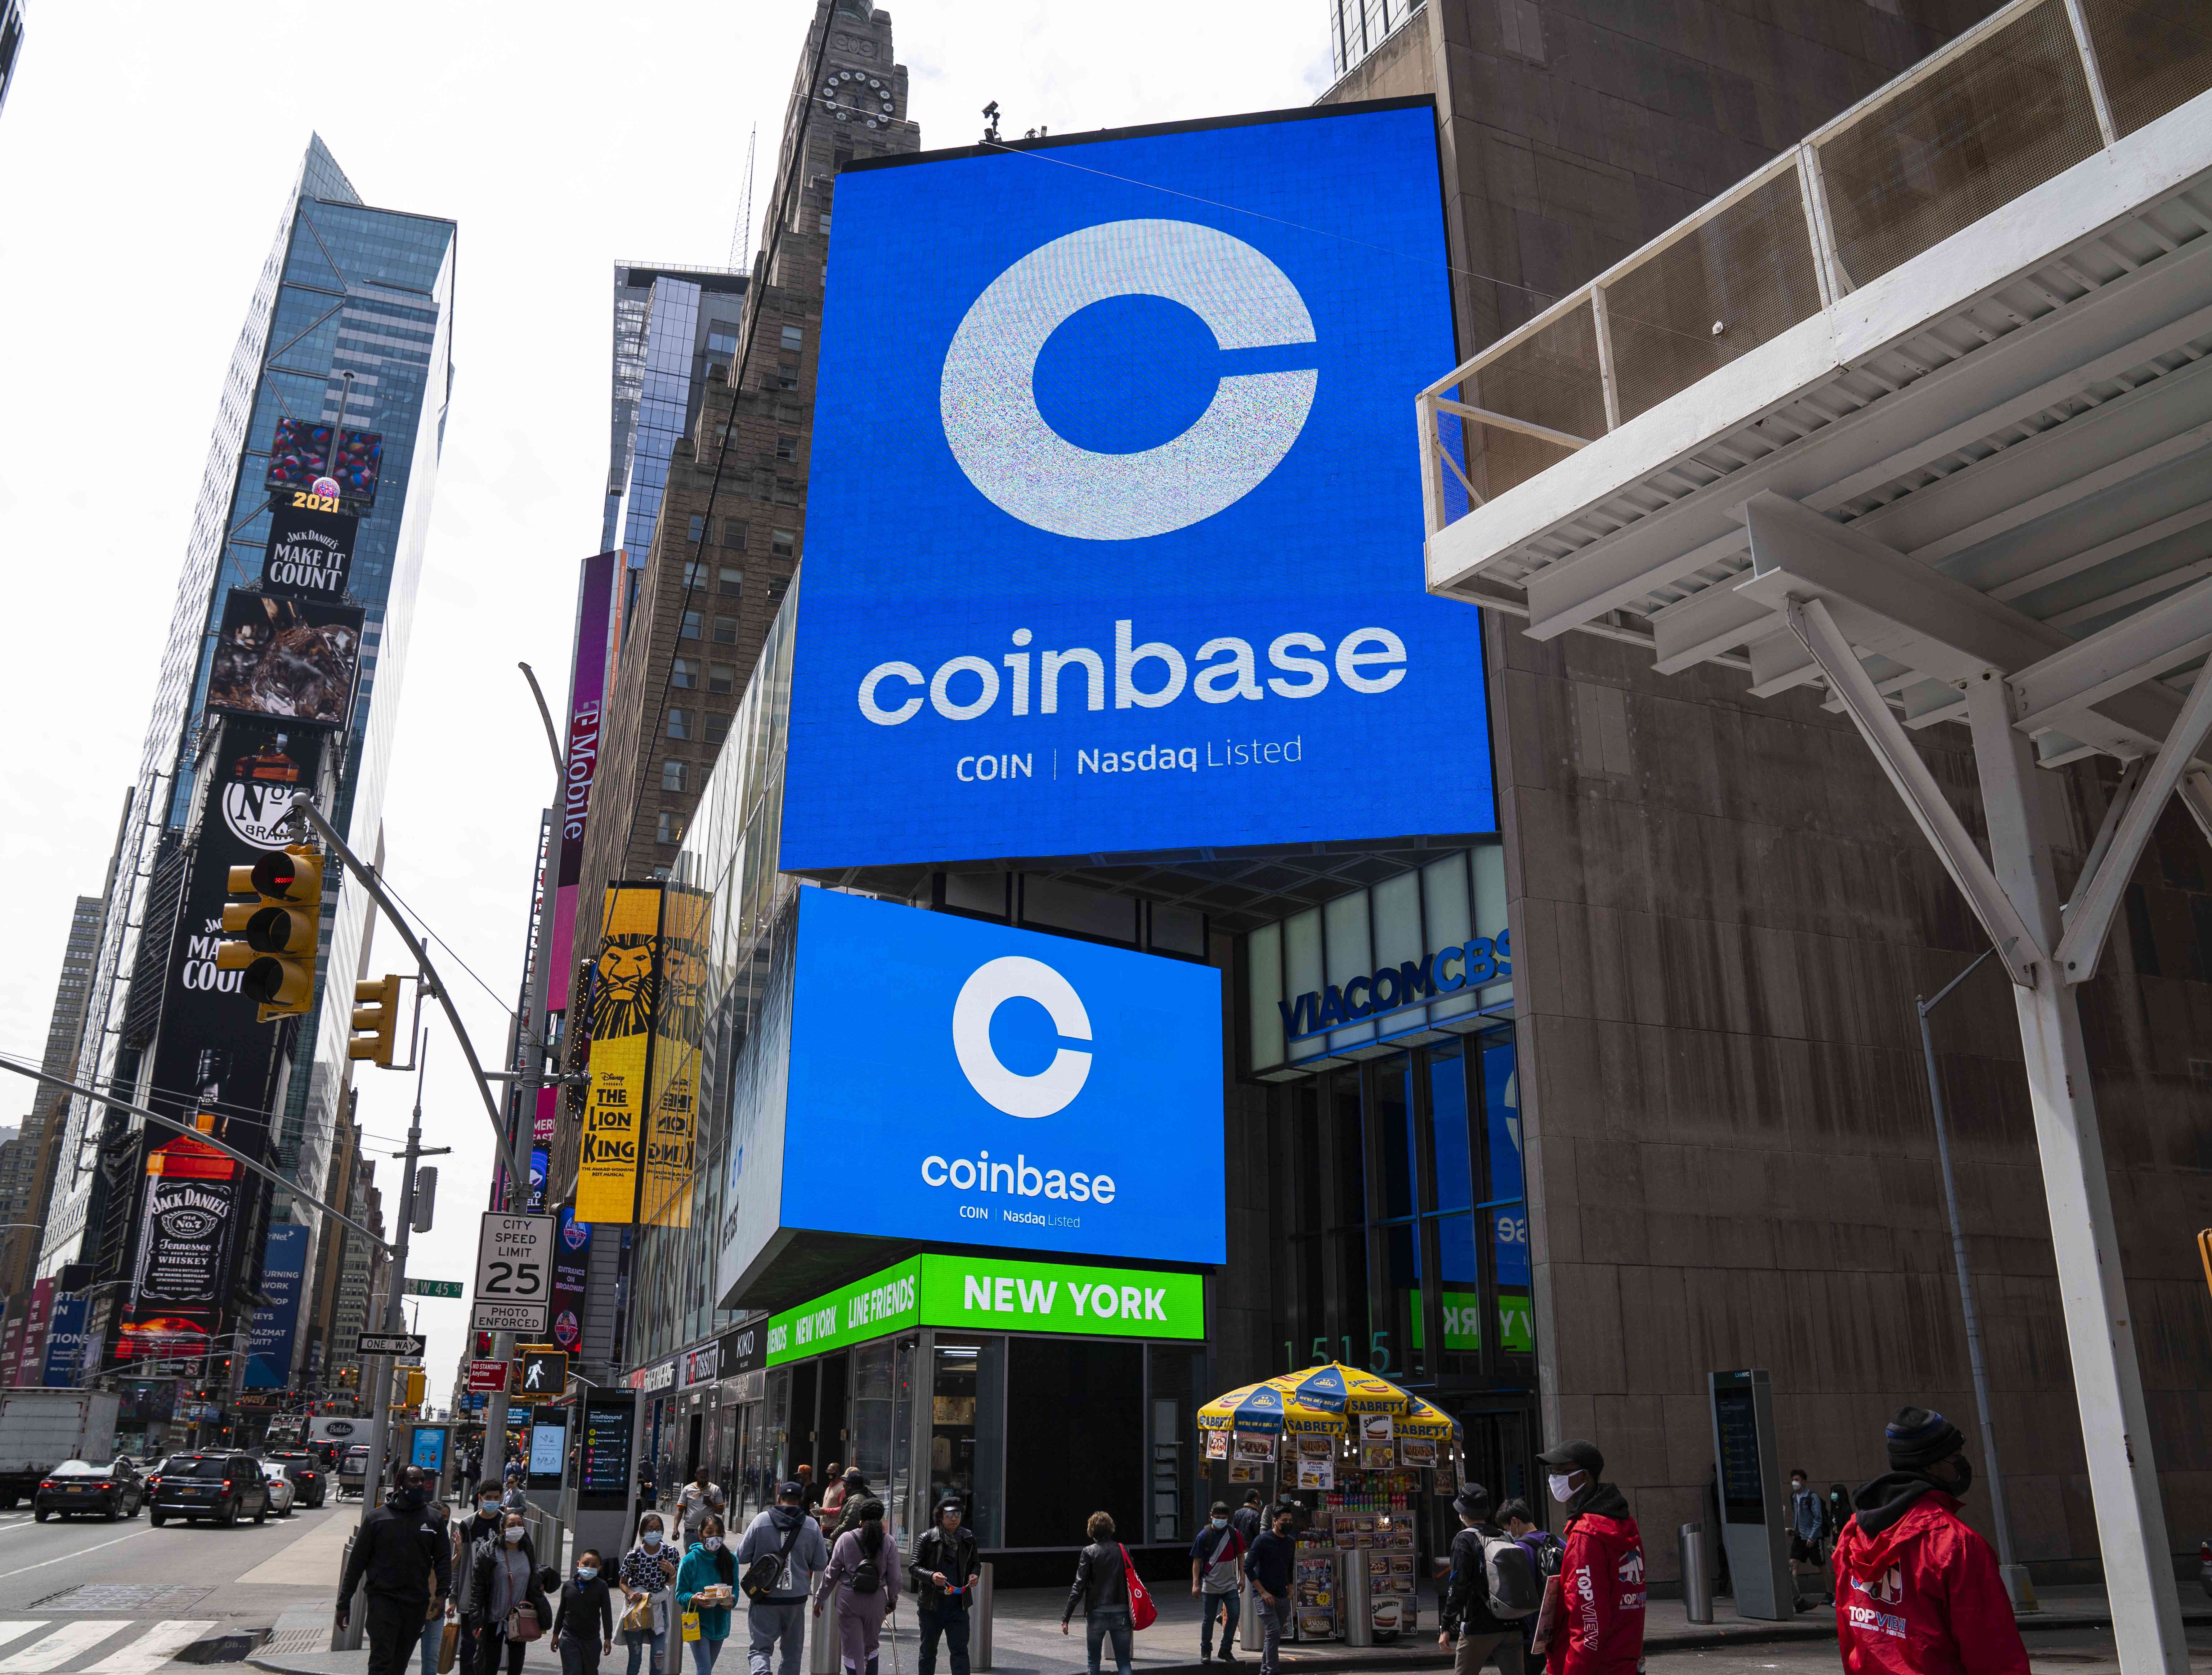 Coinbase signage during the company's initial public offering (IPO) at the Nasdaq market site April 14, 2021 in New York City. 